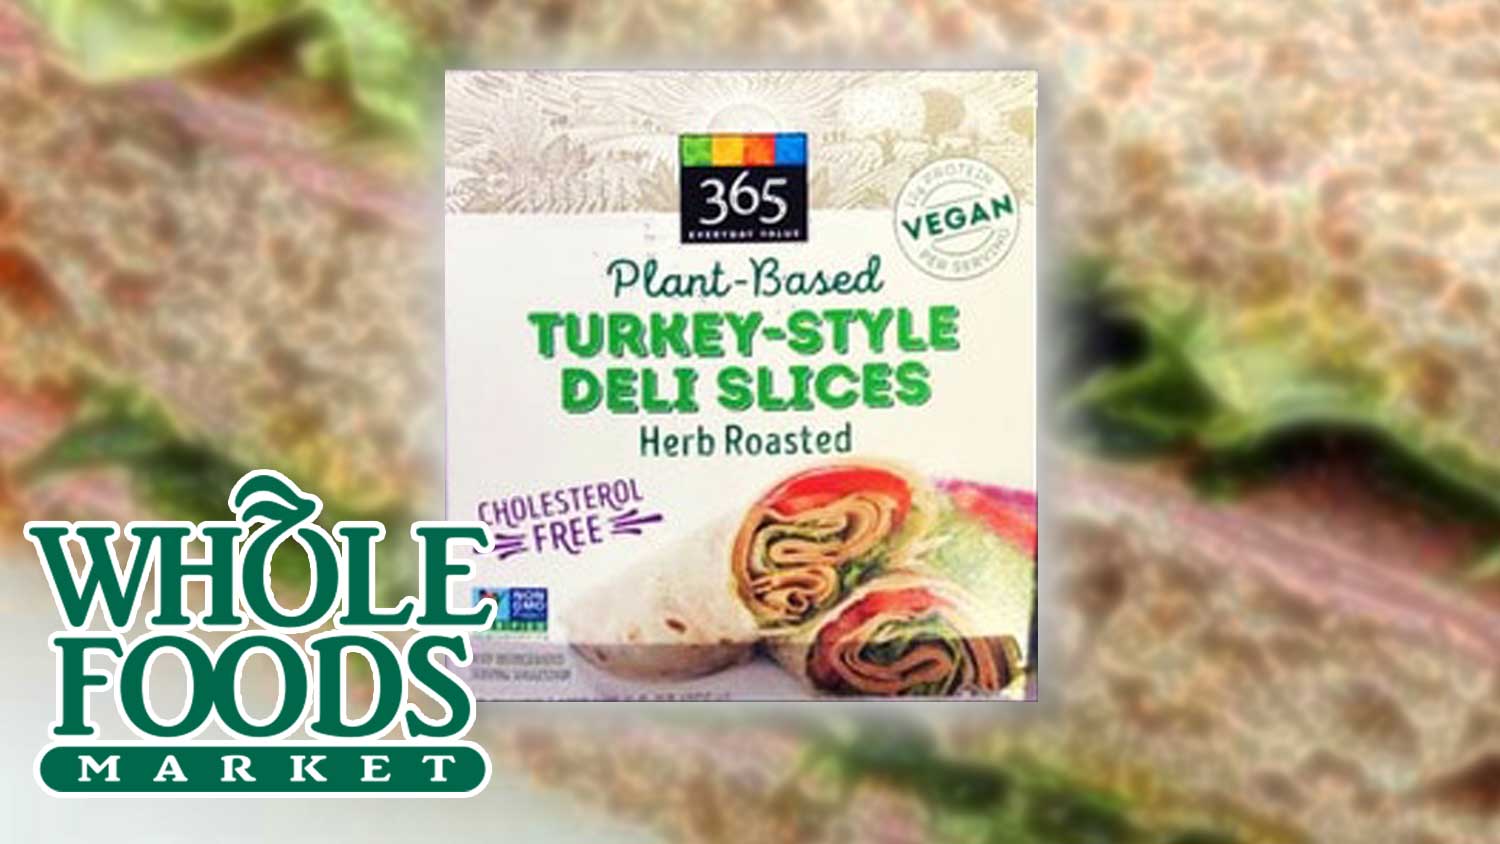 Whole Foods Just Launched Vegan Turkey Slices